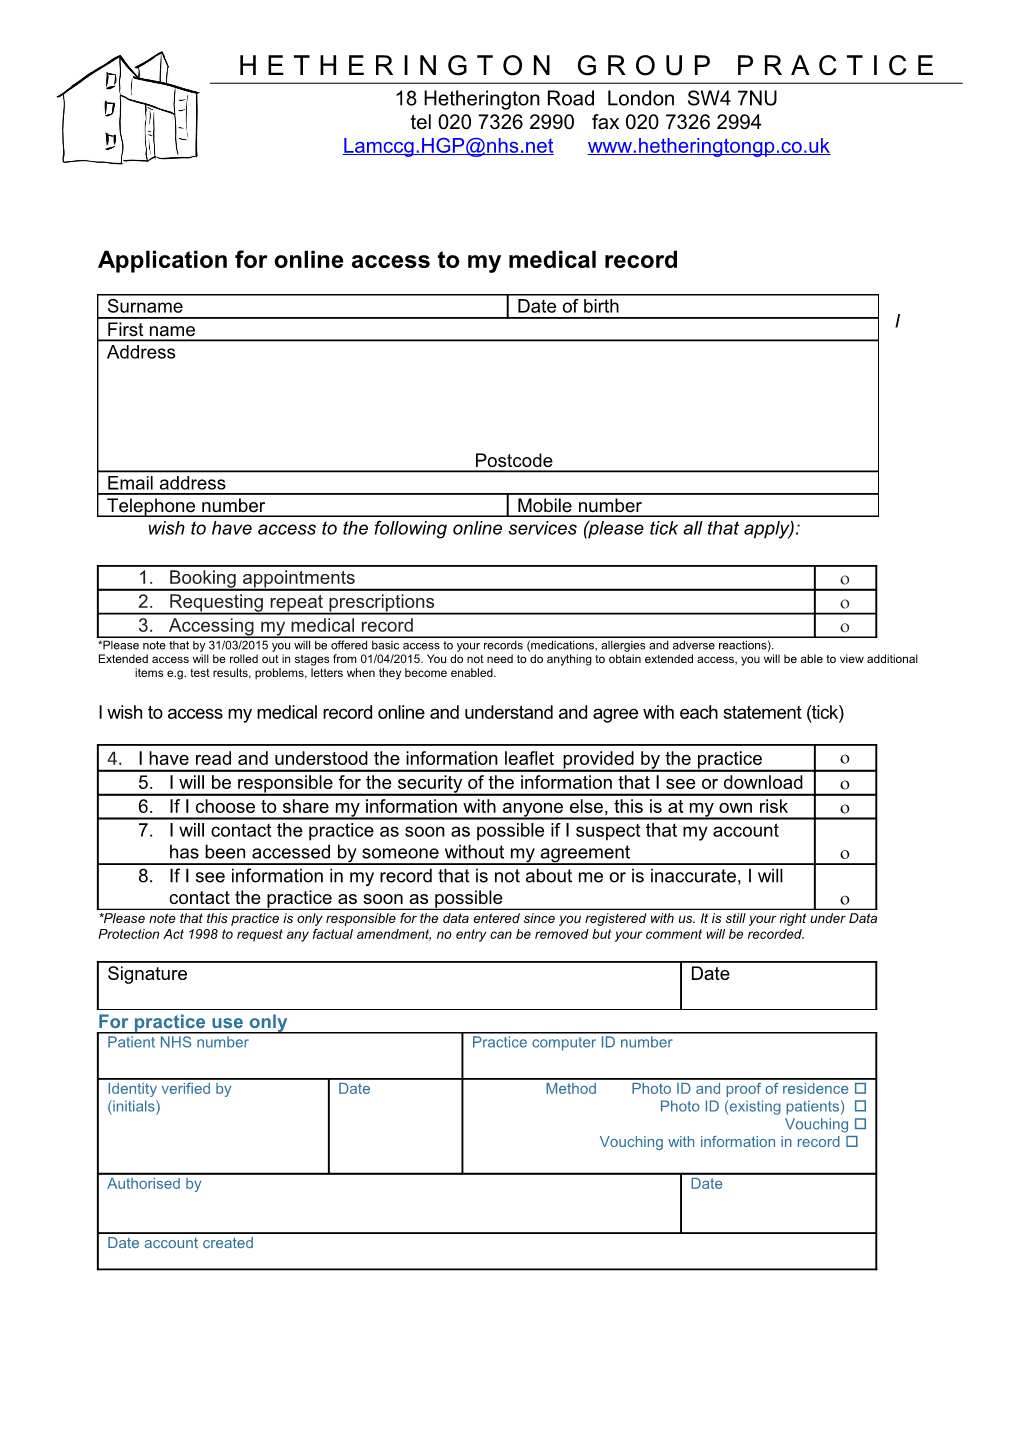 Application for Online Access to My Medical Record